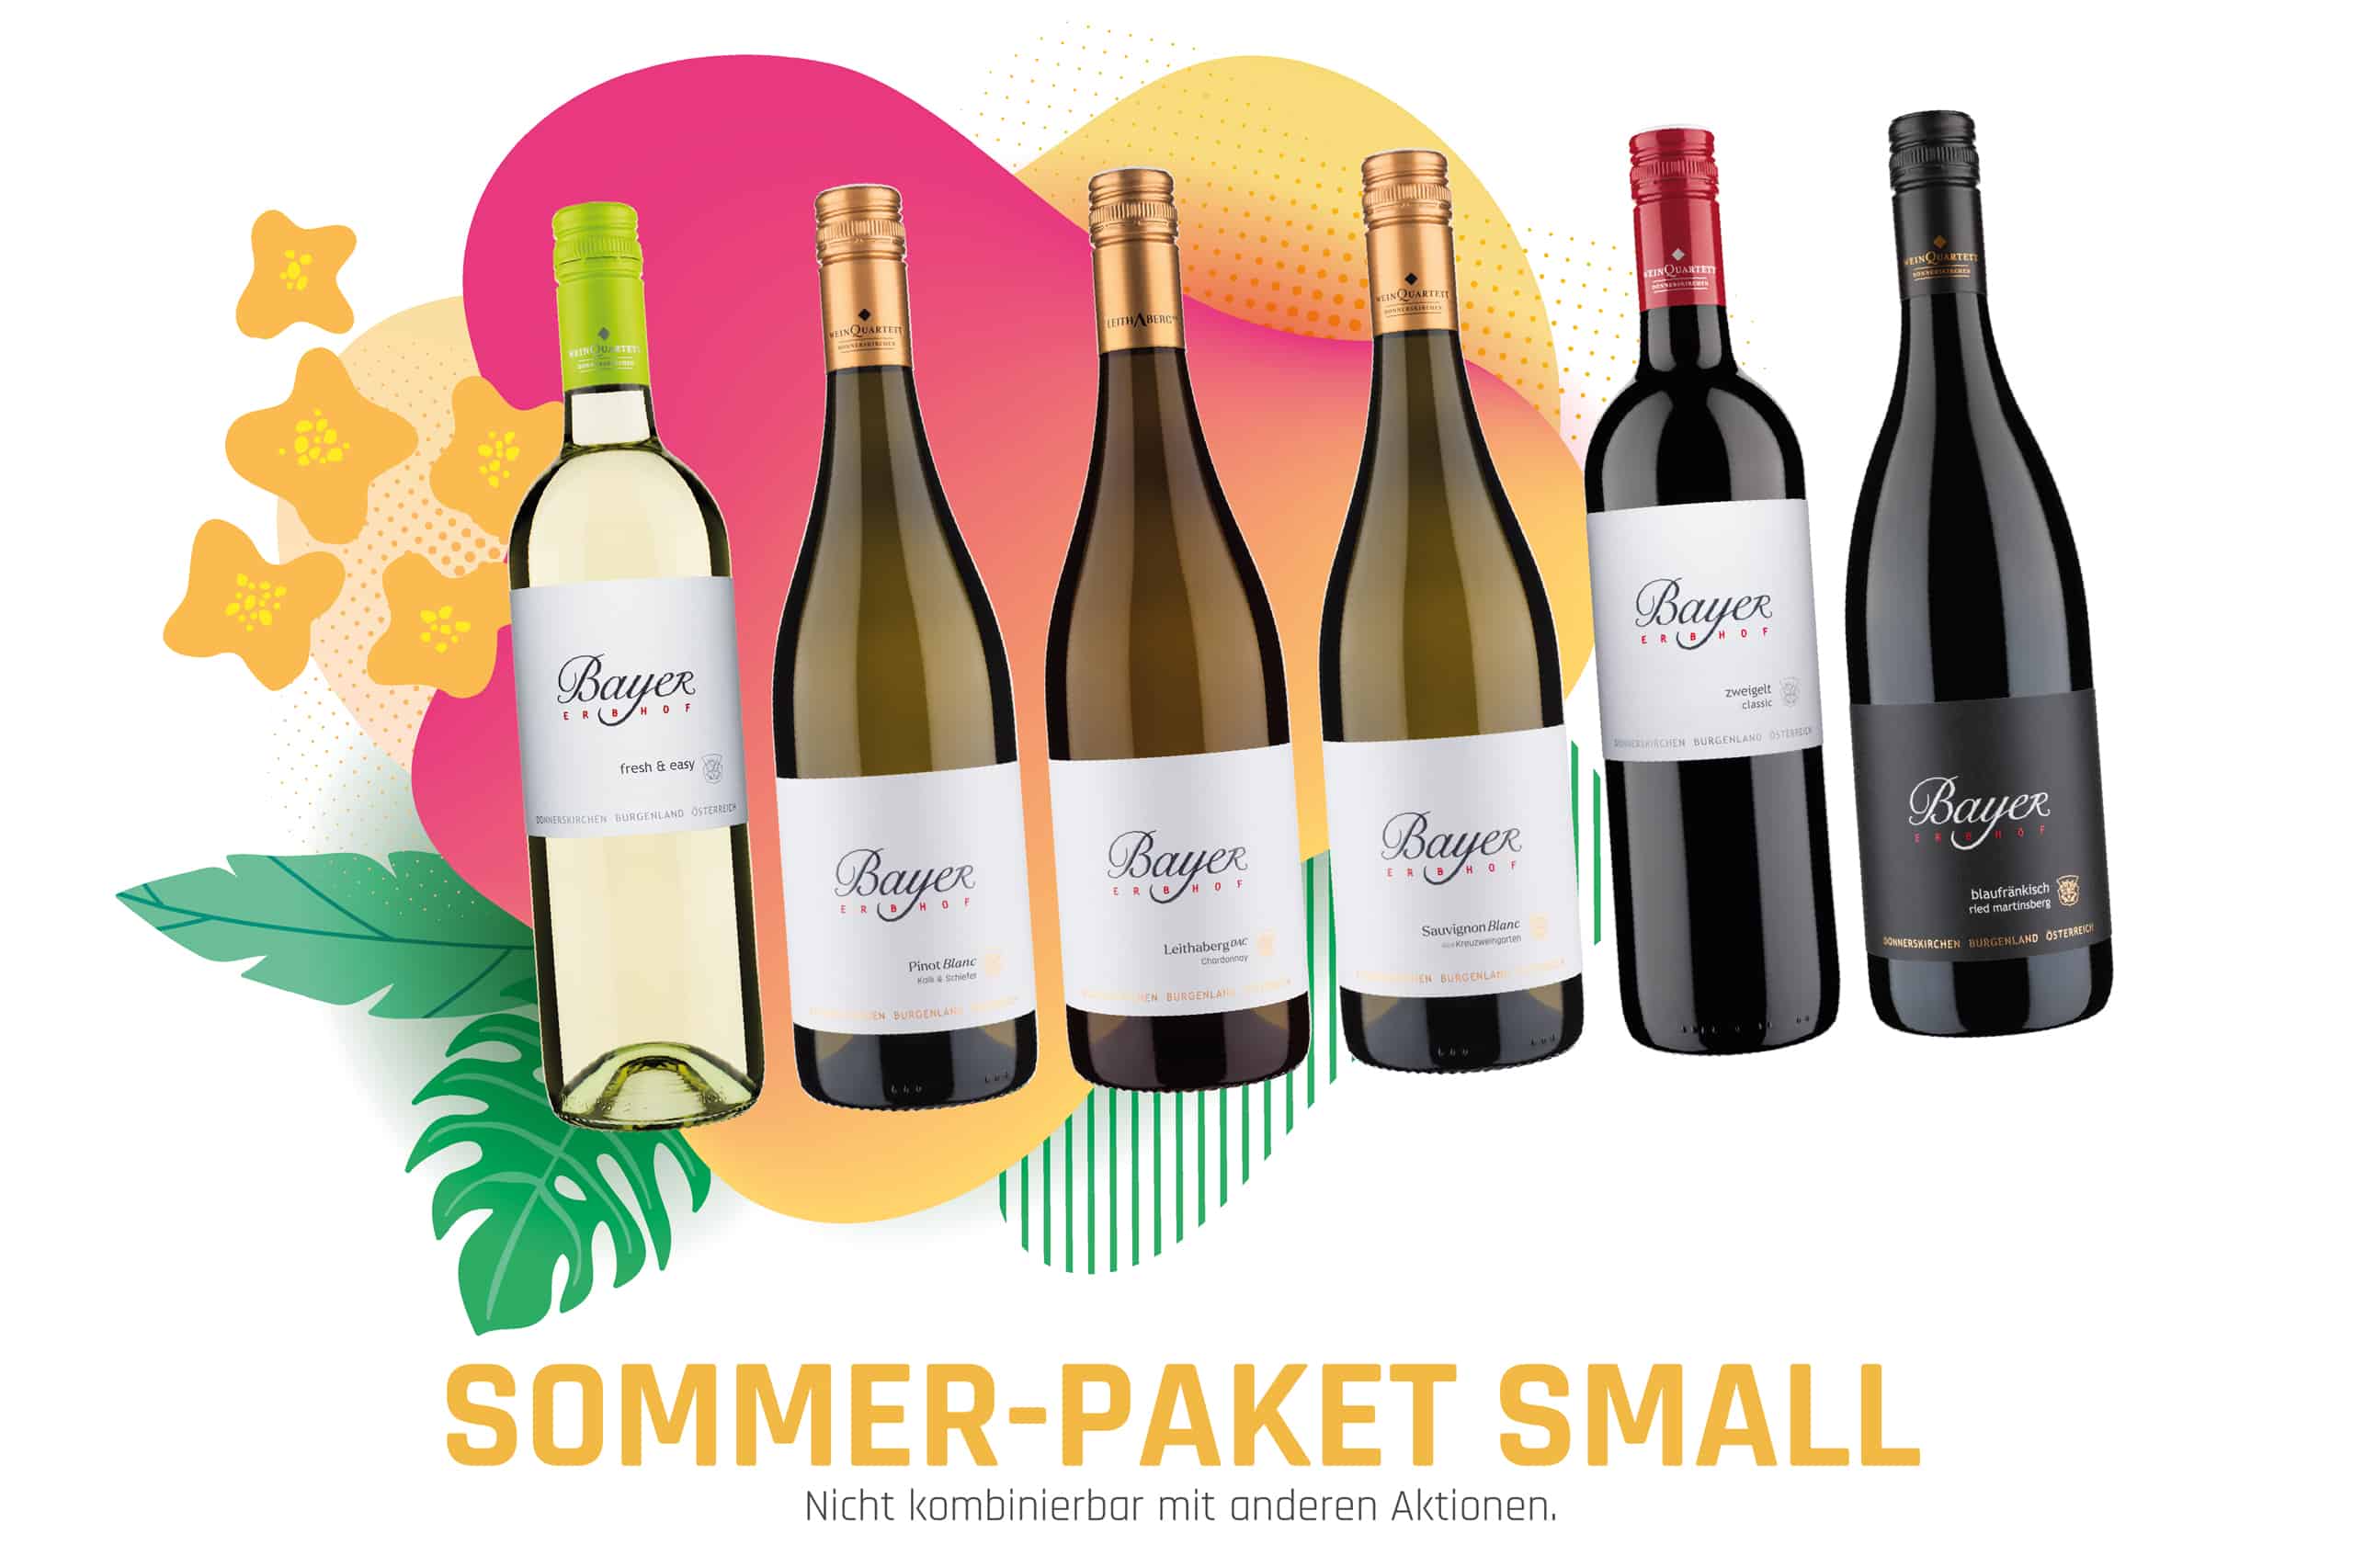 Featured image for “Sommer-Paket Small”